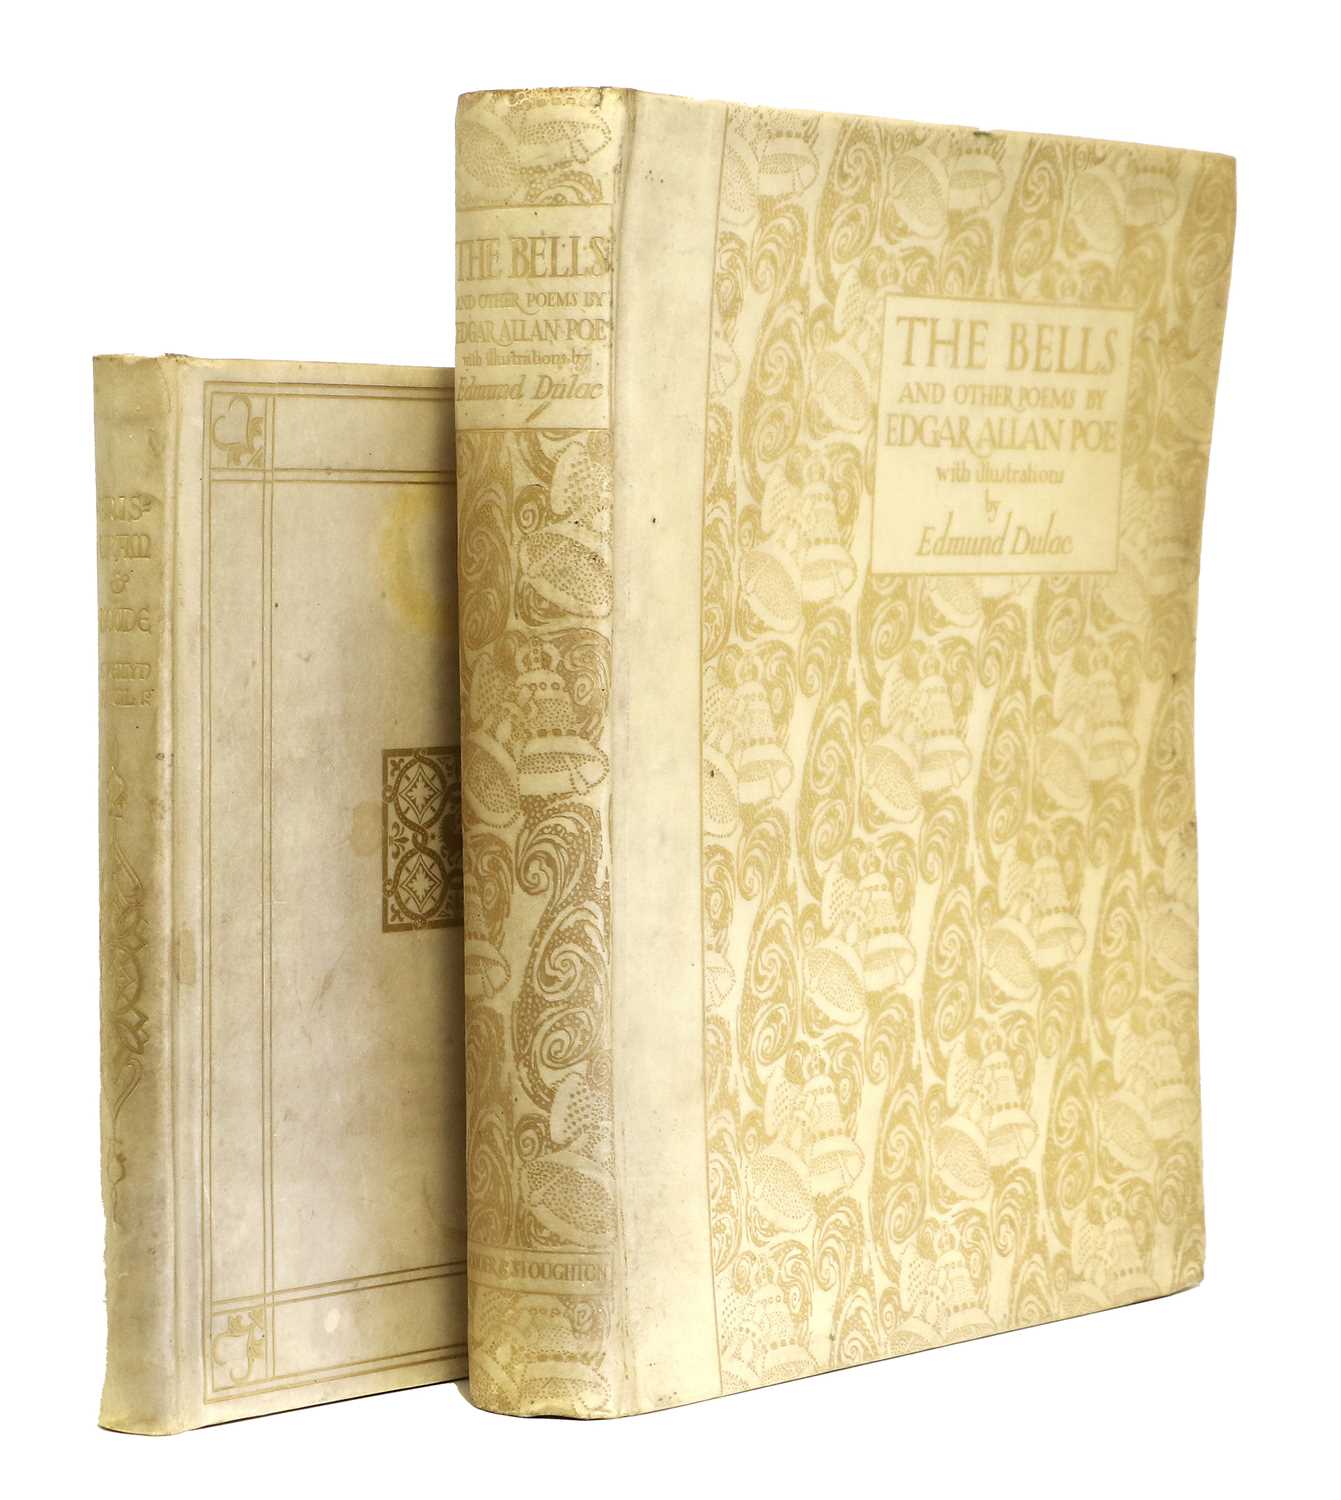 Poe (Edgar Allan). The Bells, and other Poems by Edgar Allan Poe, with illustrations by Edmund